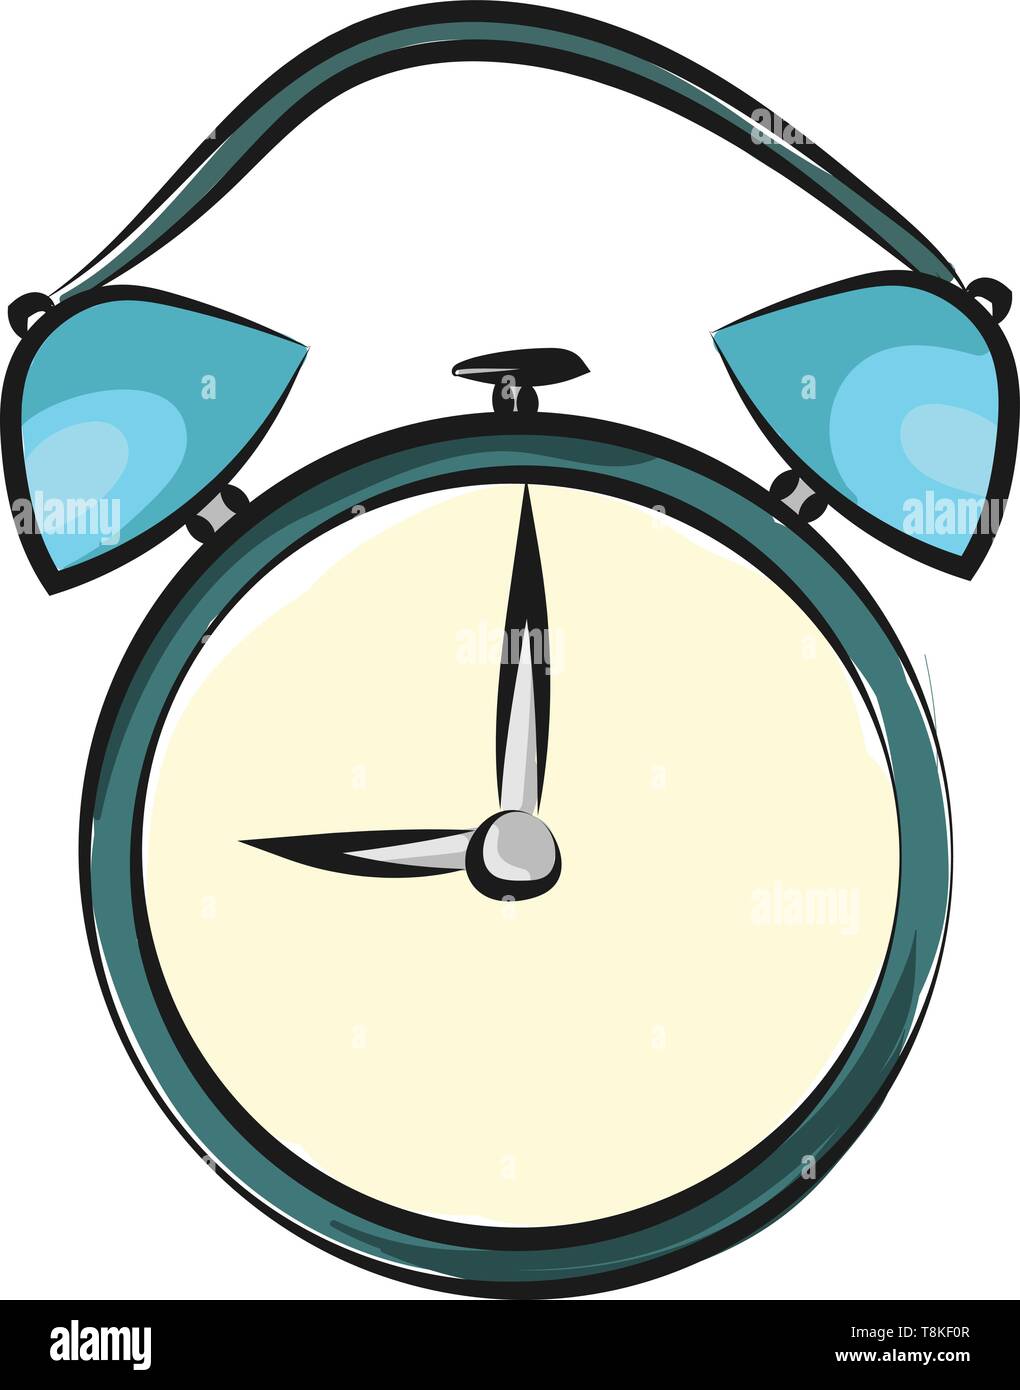 An alarm clock is a clock with a mechanism that sounds at a set time, used specially for waking up a person at a particular time in the morning., vect Stock Vector